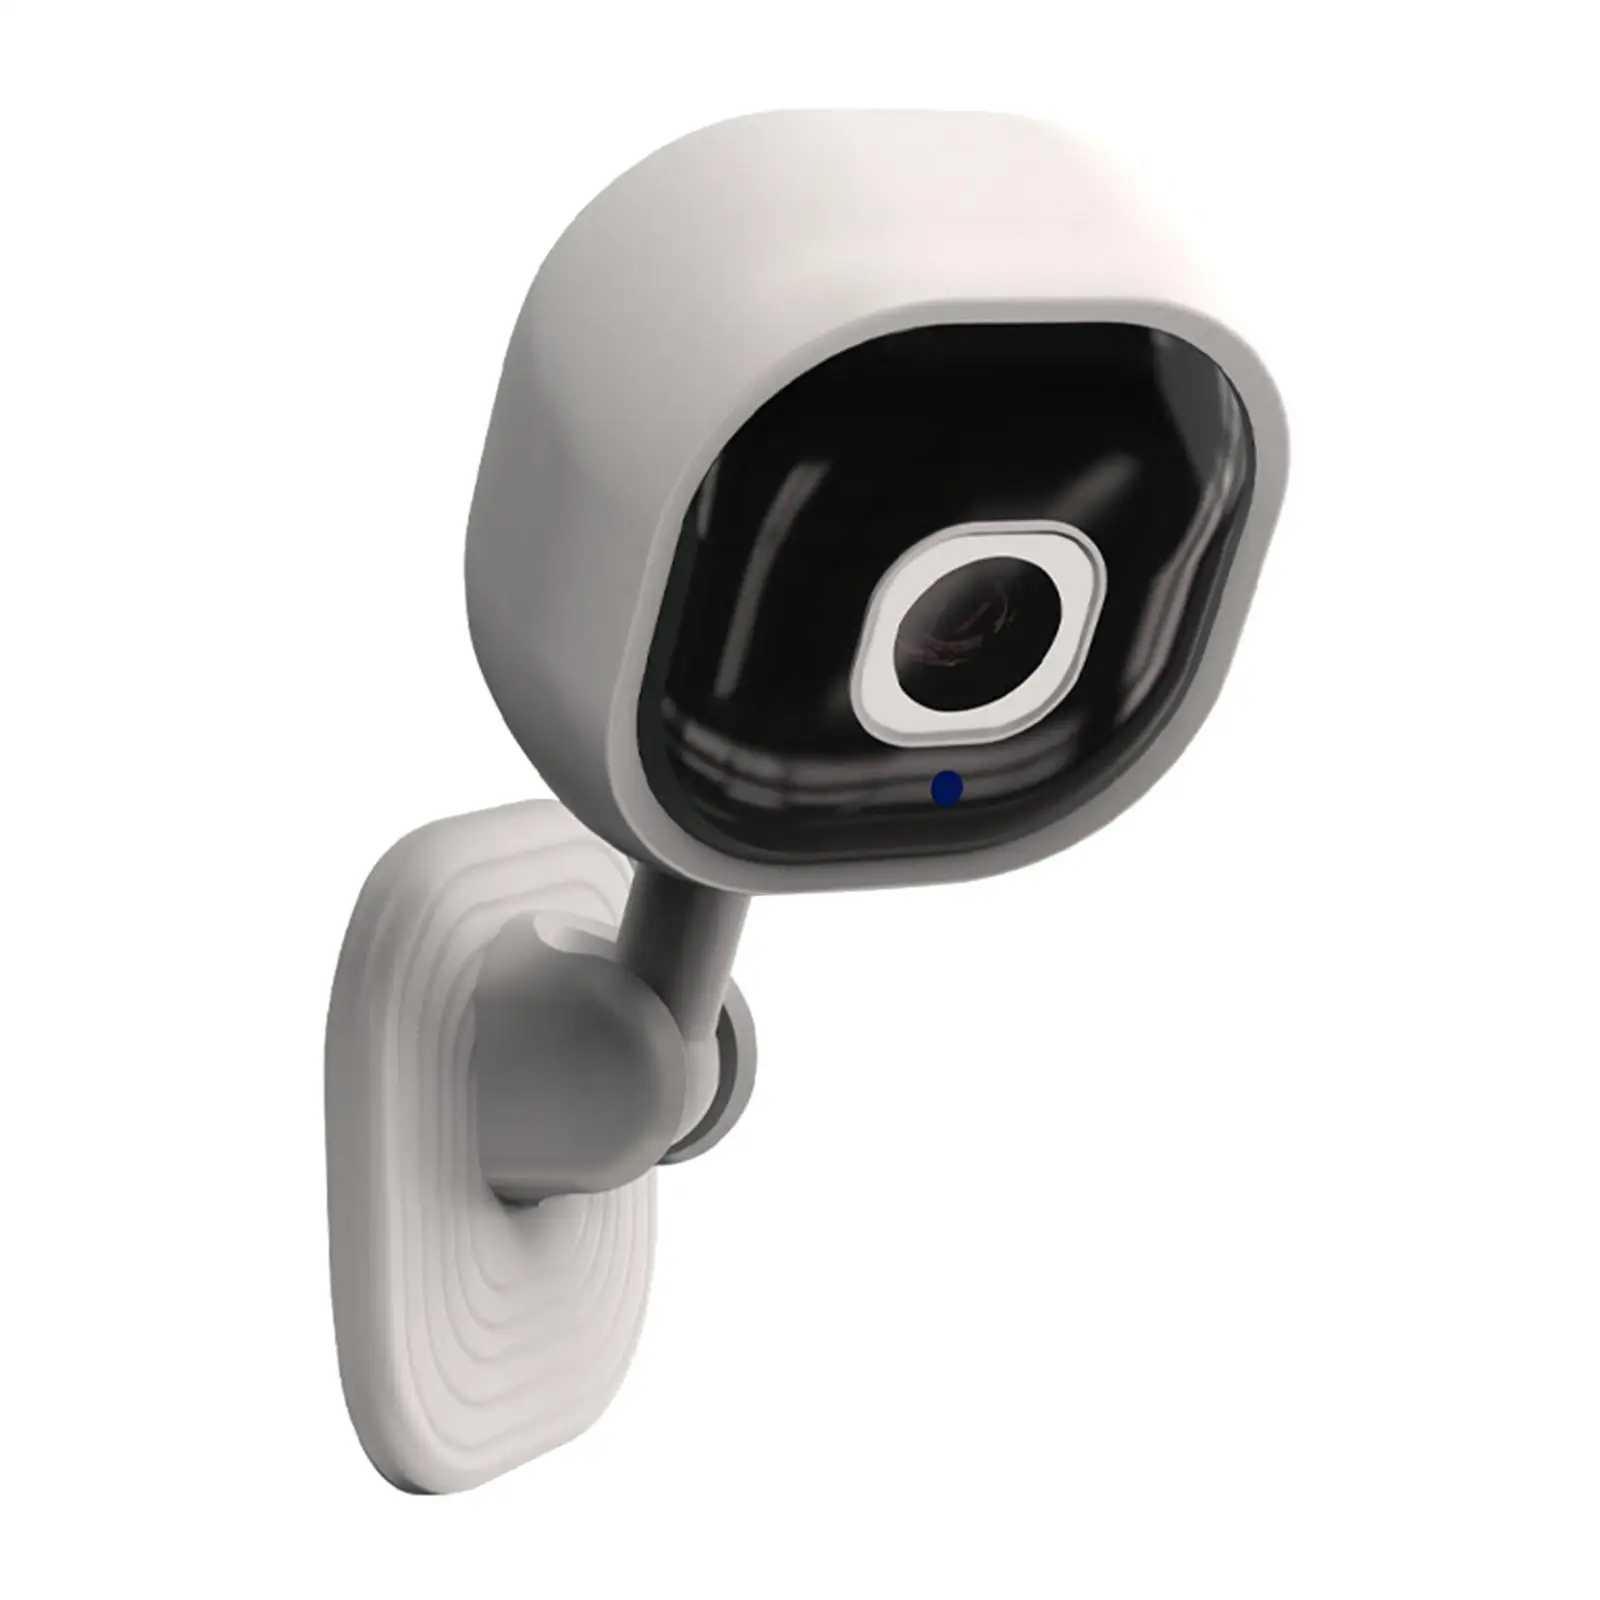 Home Security Camera Easy Installation Rotatable Lens USB Two Way Audio for Business